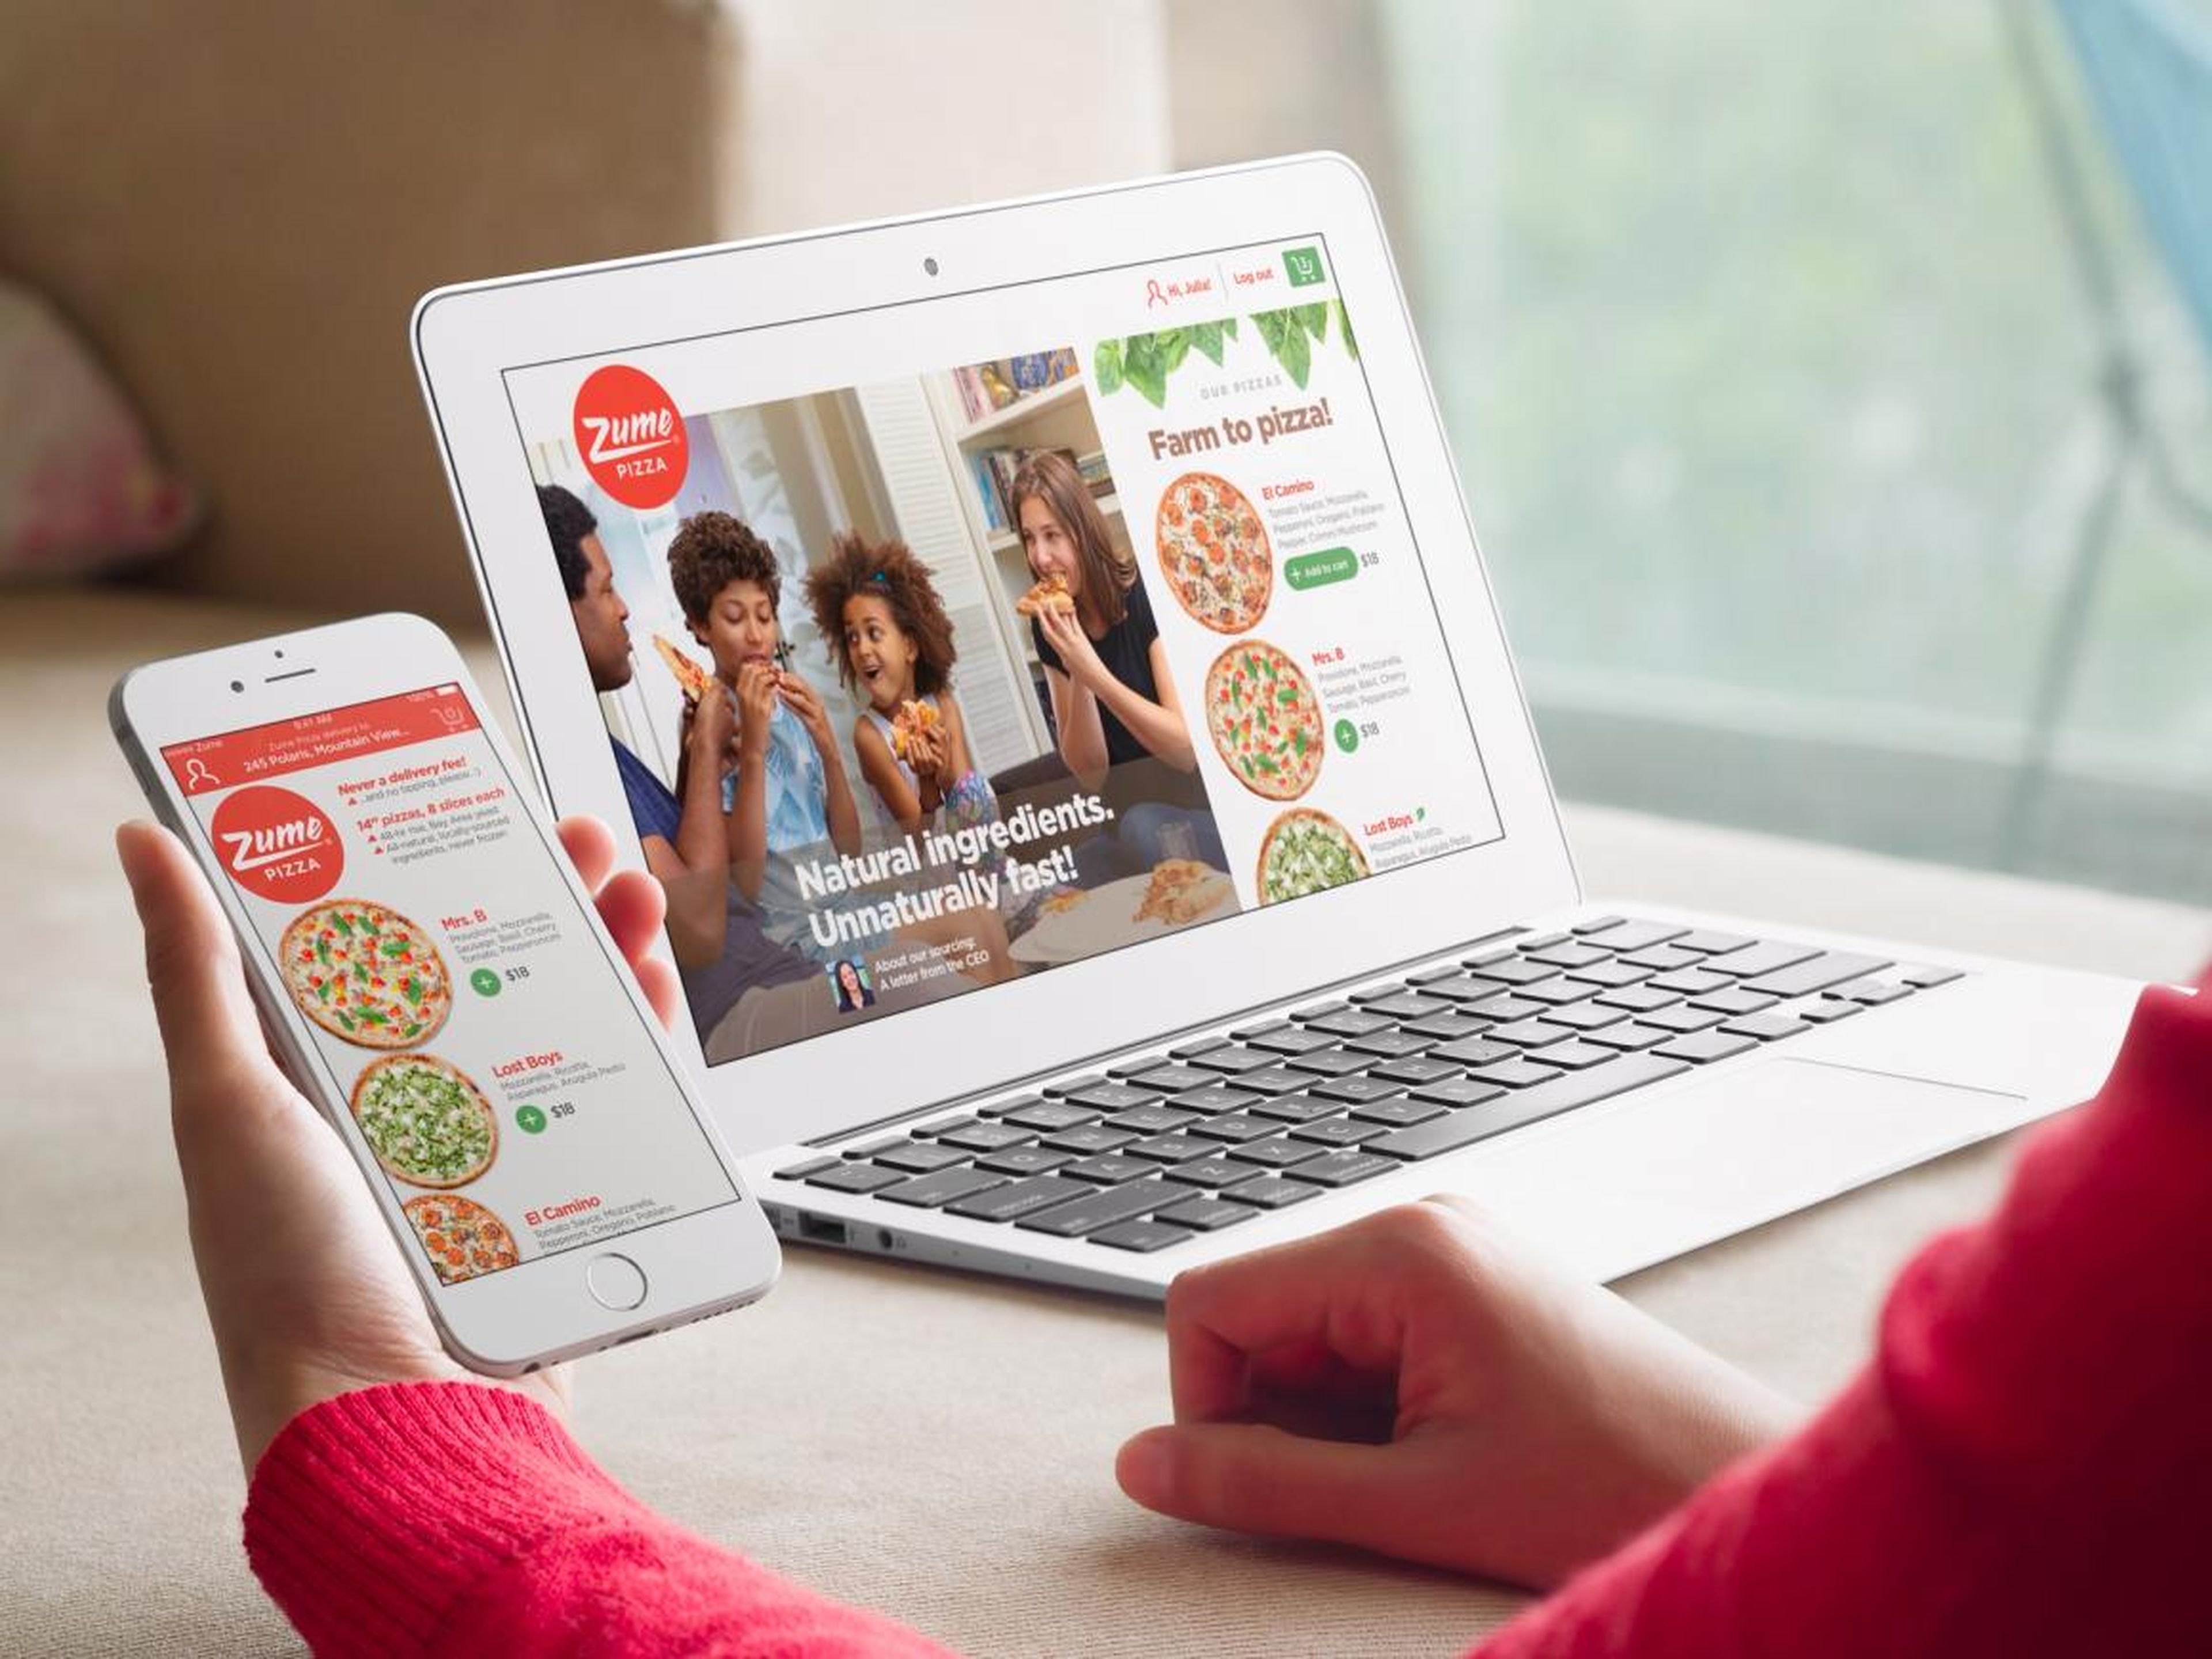 Customers order their pizzas online or using the Zume Pizza mobile app. A software algorithm sends the instructions to Zume's automated, pizza-making conveyor belt.